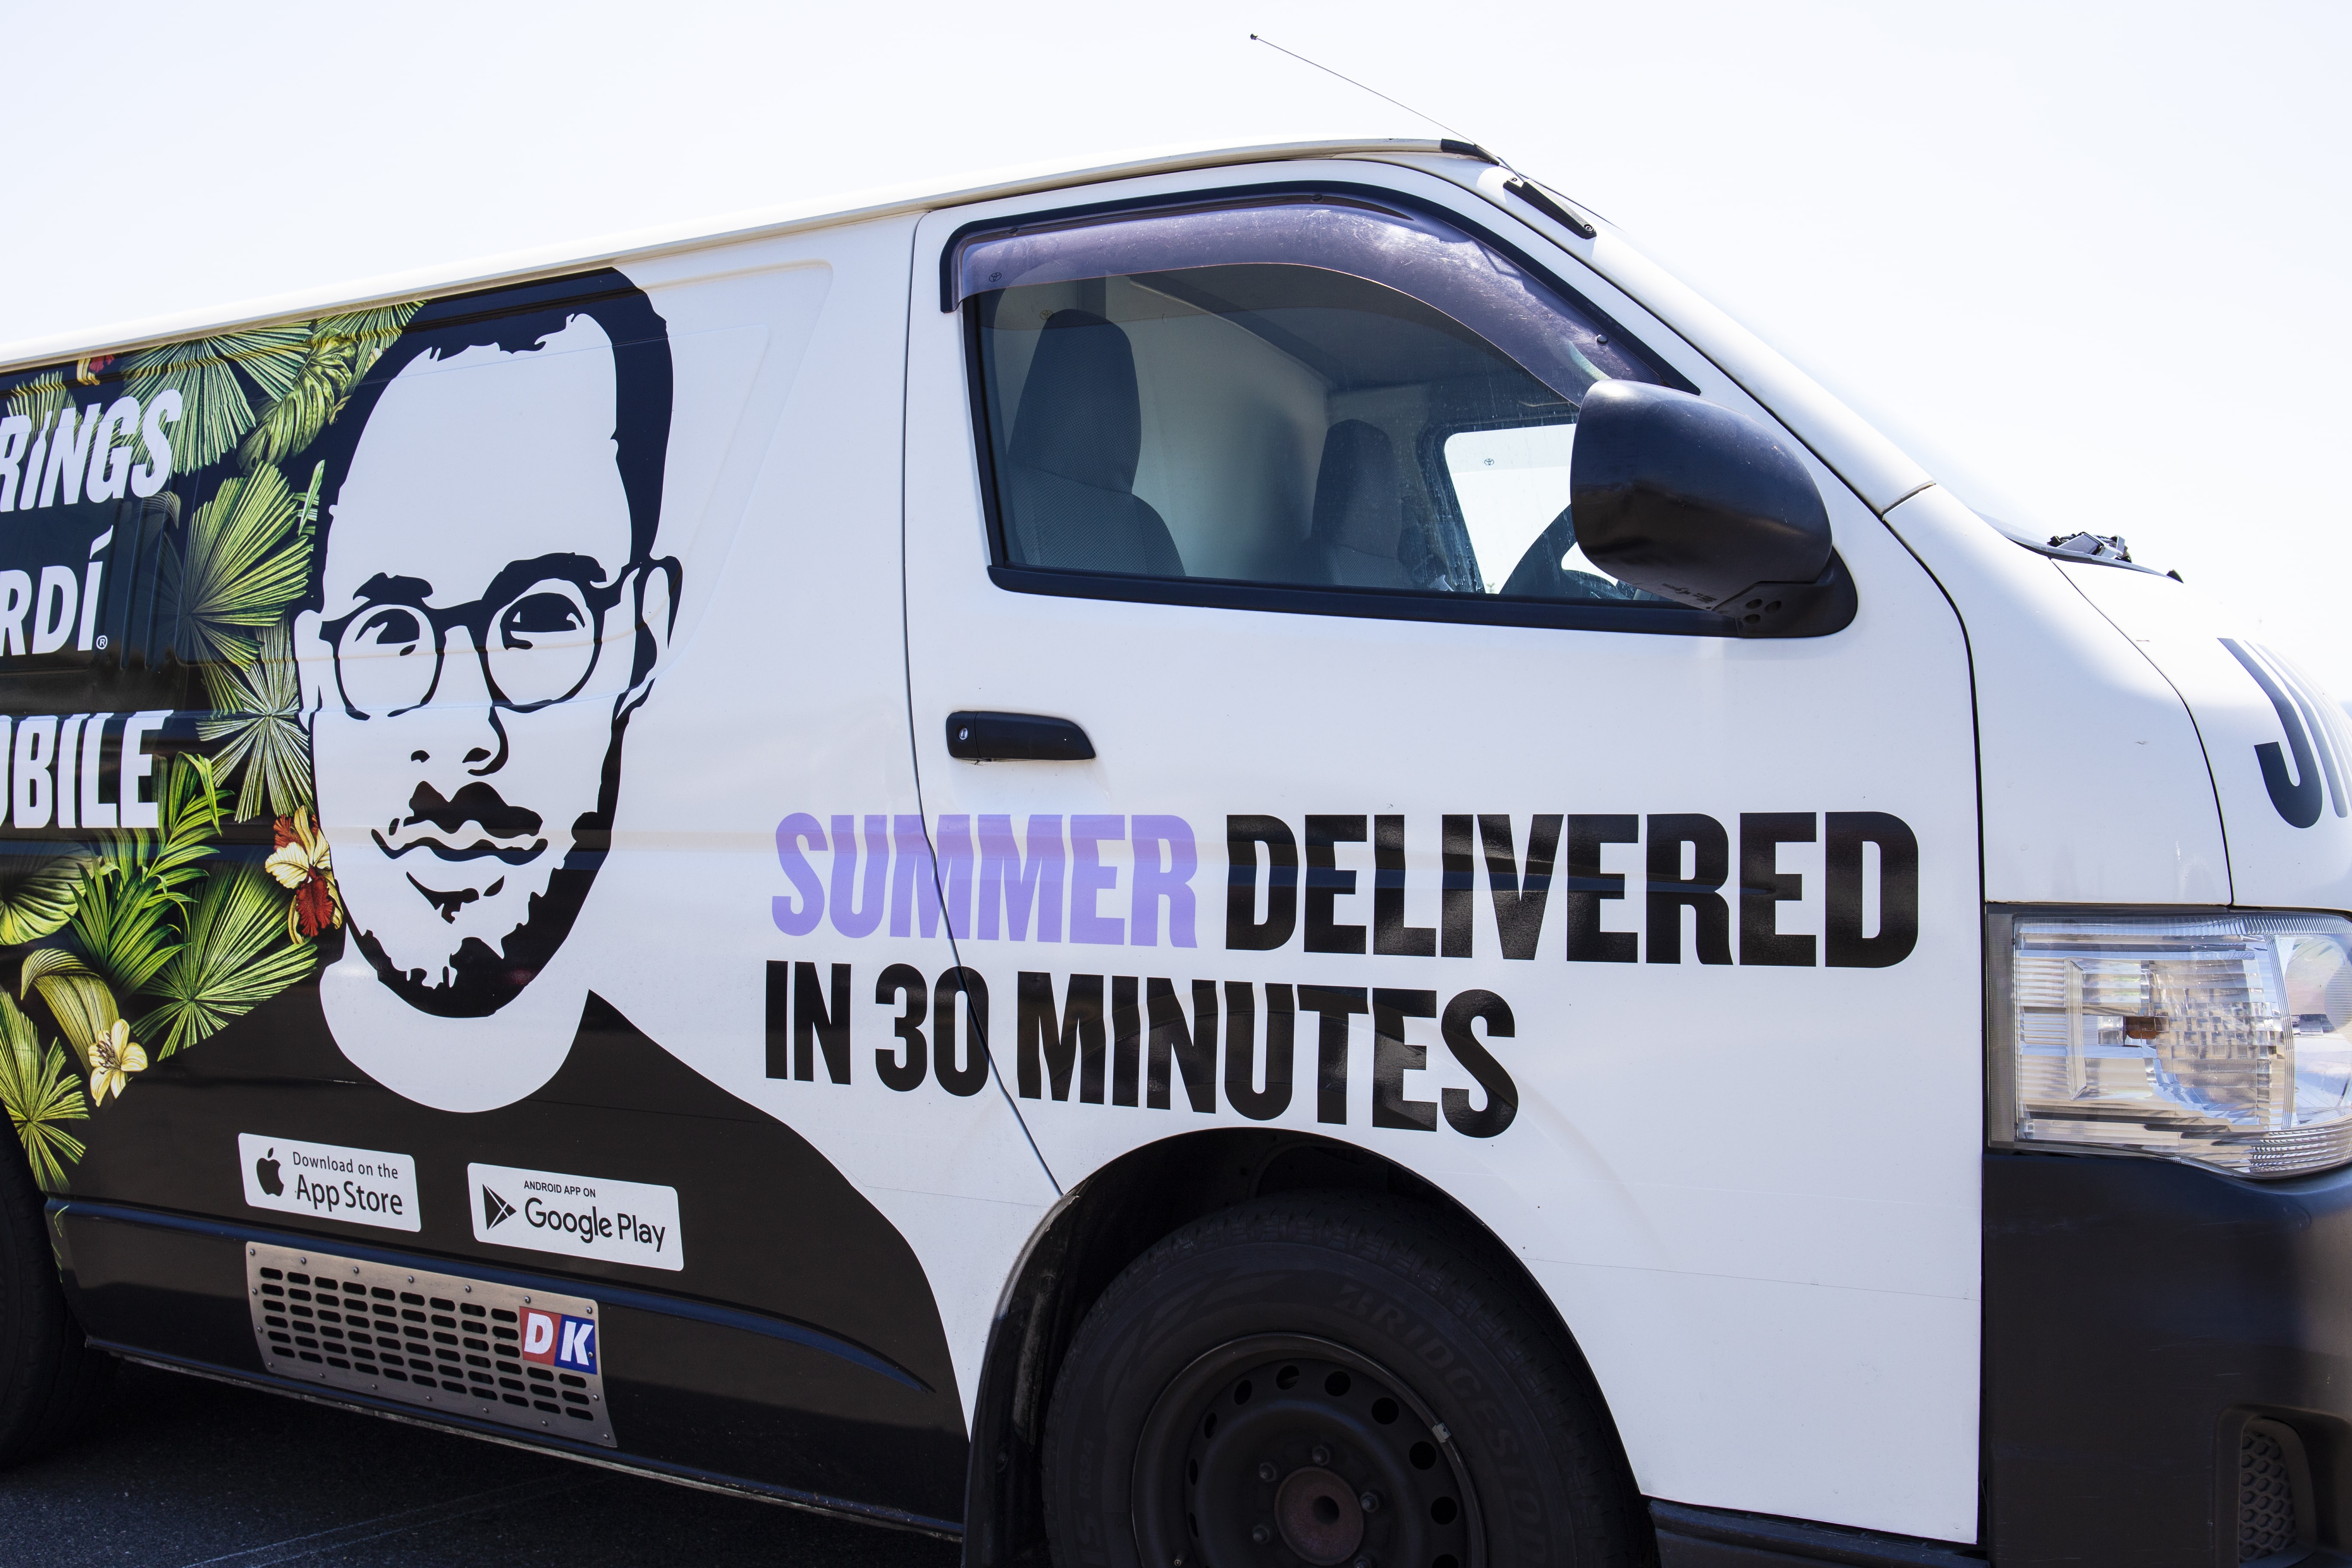 Bacardi Teams Up With Undeniably Convenient Jimmy Brings To Deliver Summer In 30 Minutes.